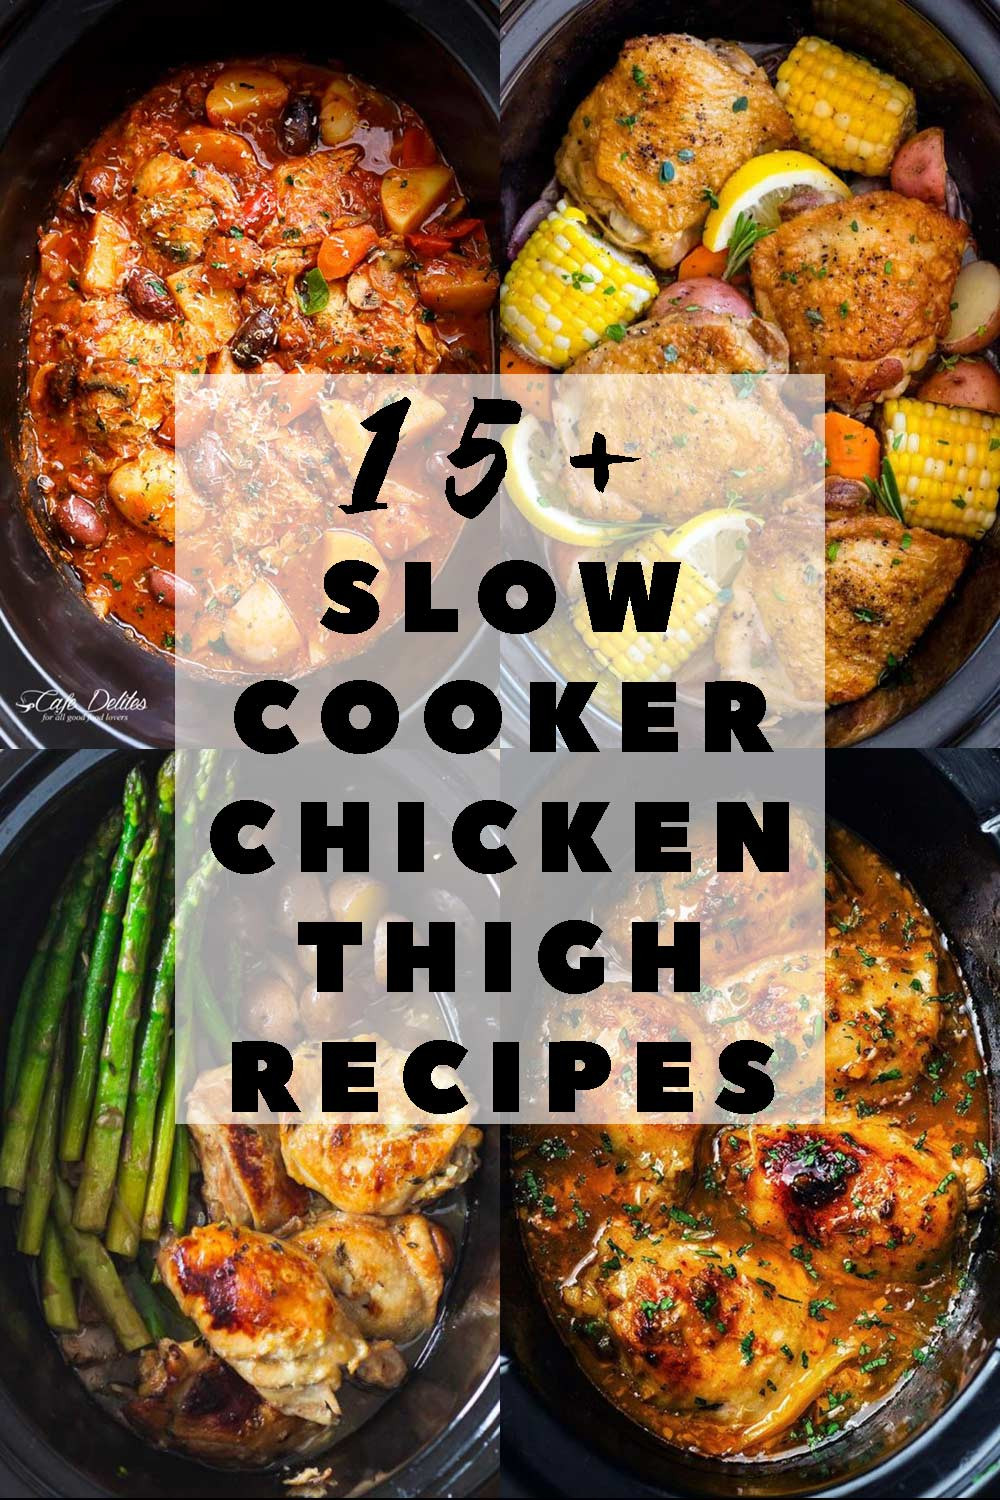 Slow Cook Chicken Thighs
 The 15 Best Slow Cooker Chicken Thigh Recipes Green